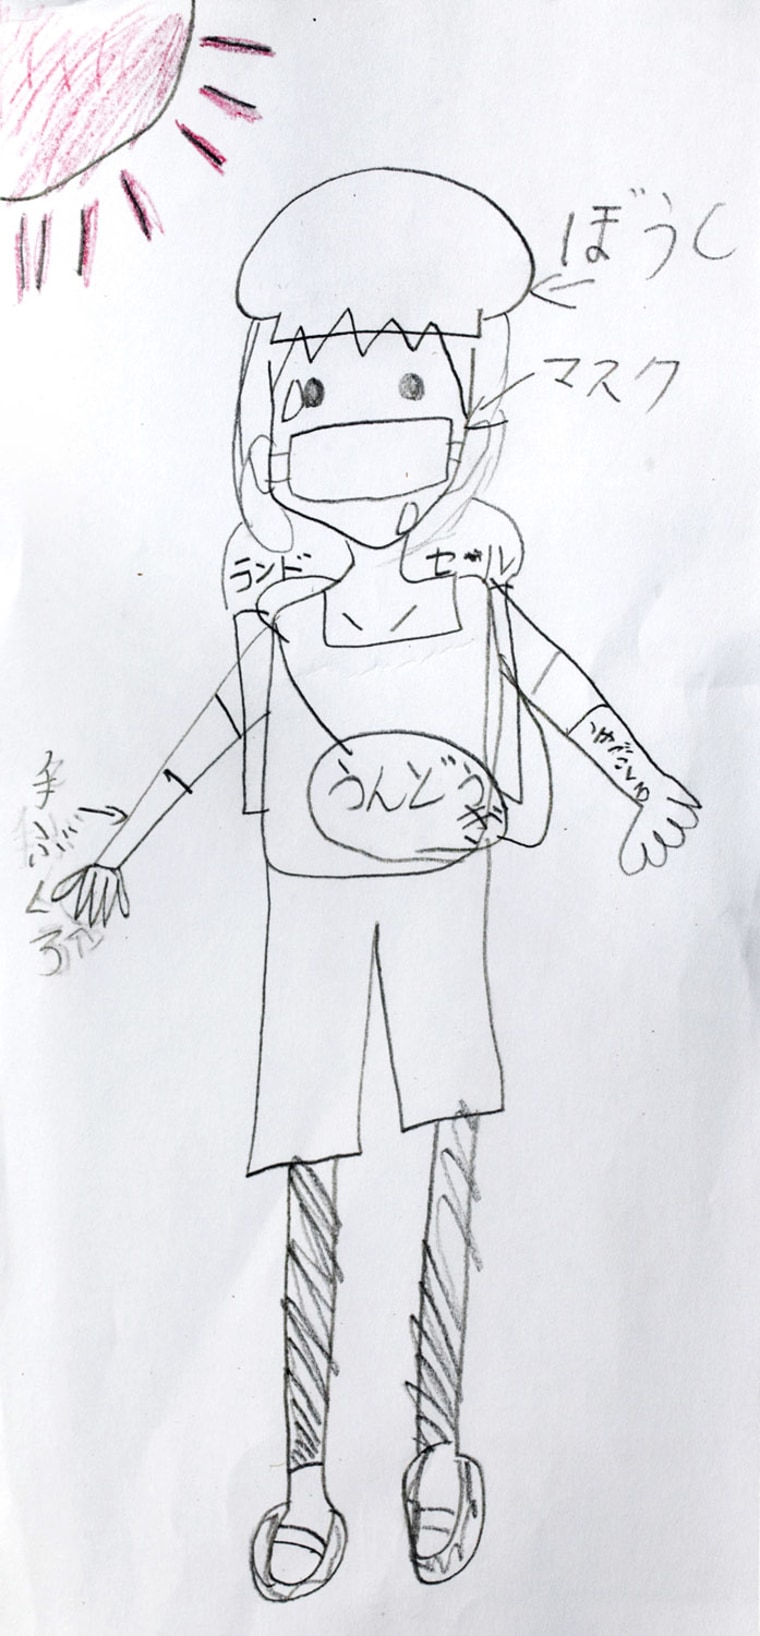 Drawing made by a child from Japan. Families from Fukushima are staying with American families in Portland, Oregon, to escape radiation from damaged nuclear reactors following an earthquake and tsunami.